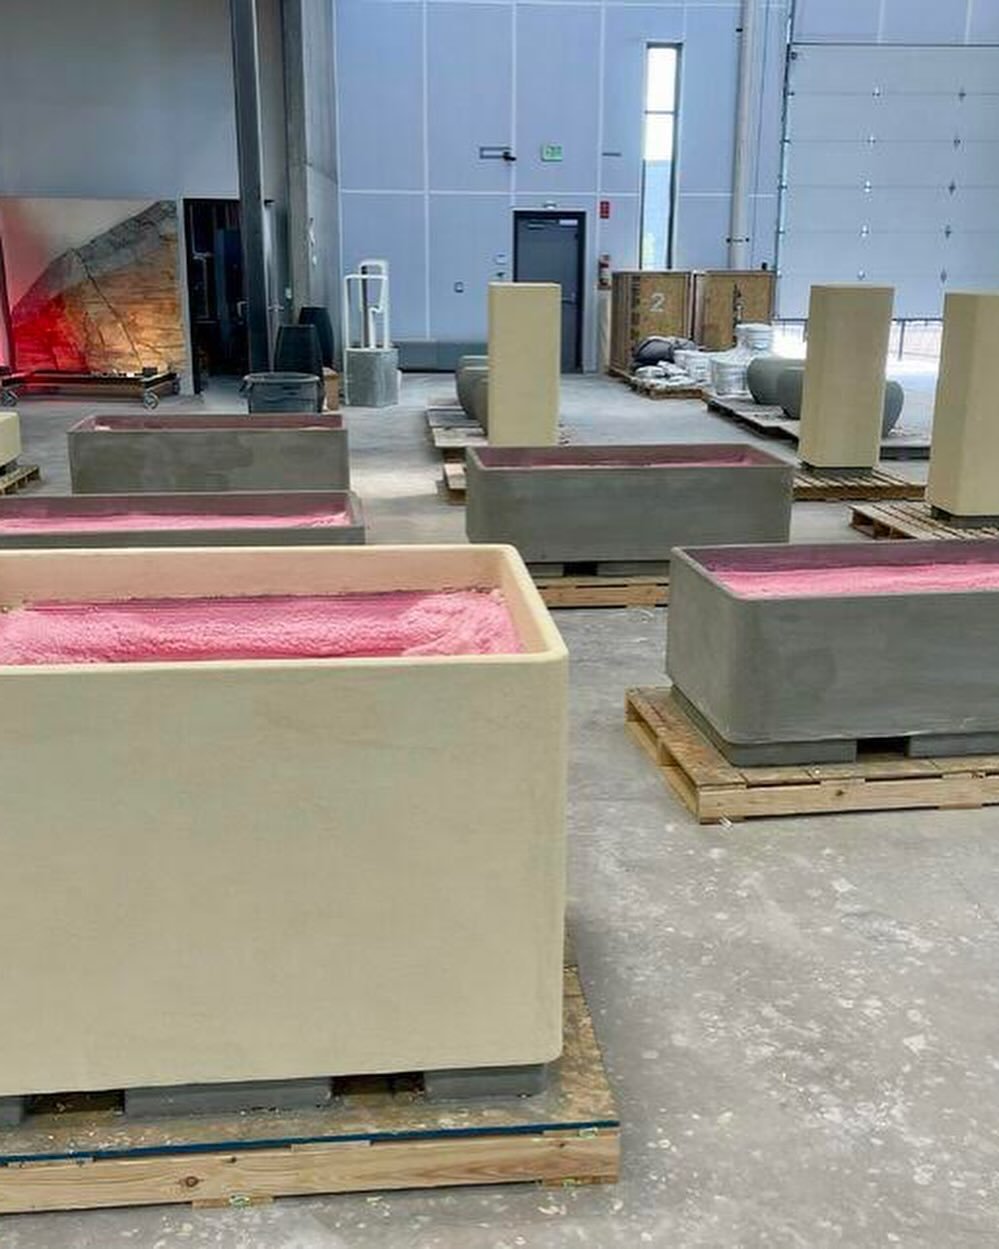 California&rsquo;s latest green space features @pikus3d printed planters and seating-from print to ship in just 2 weeks! Pikus is redefining efficiency in construction. #3dconstructionprinting #3dprinting #3dprintedconcrete #urbantransformation #land